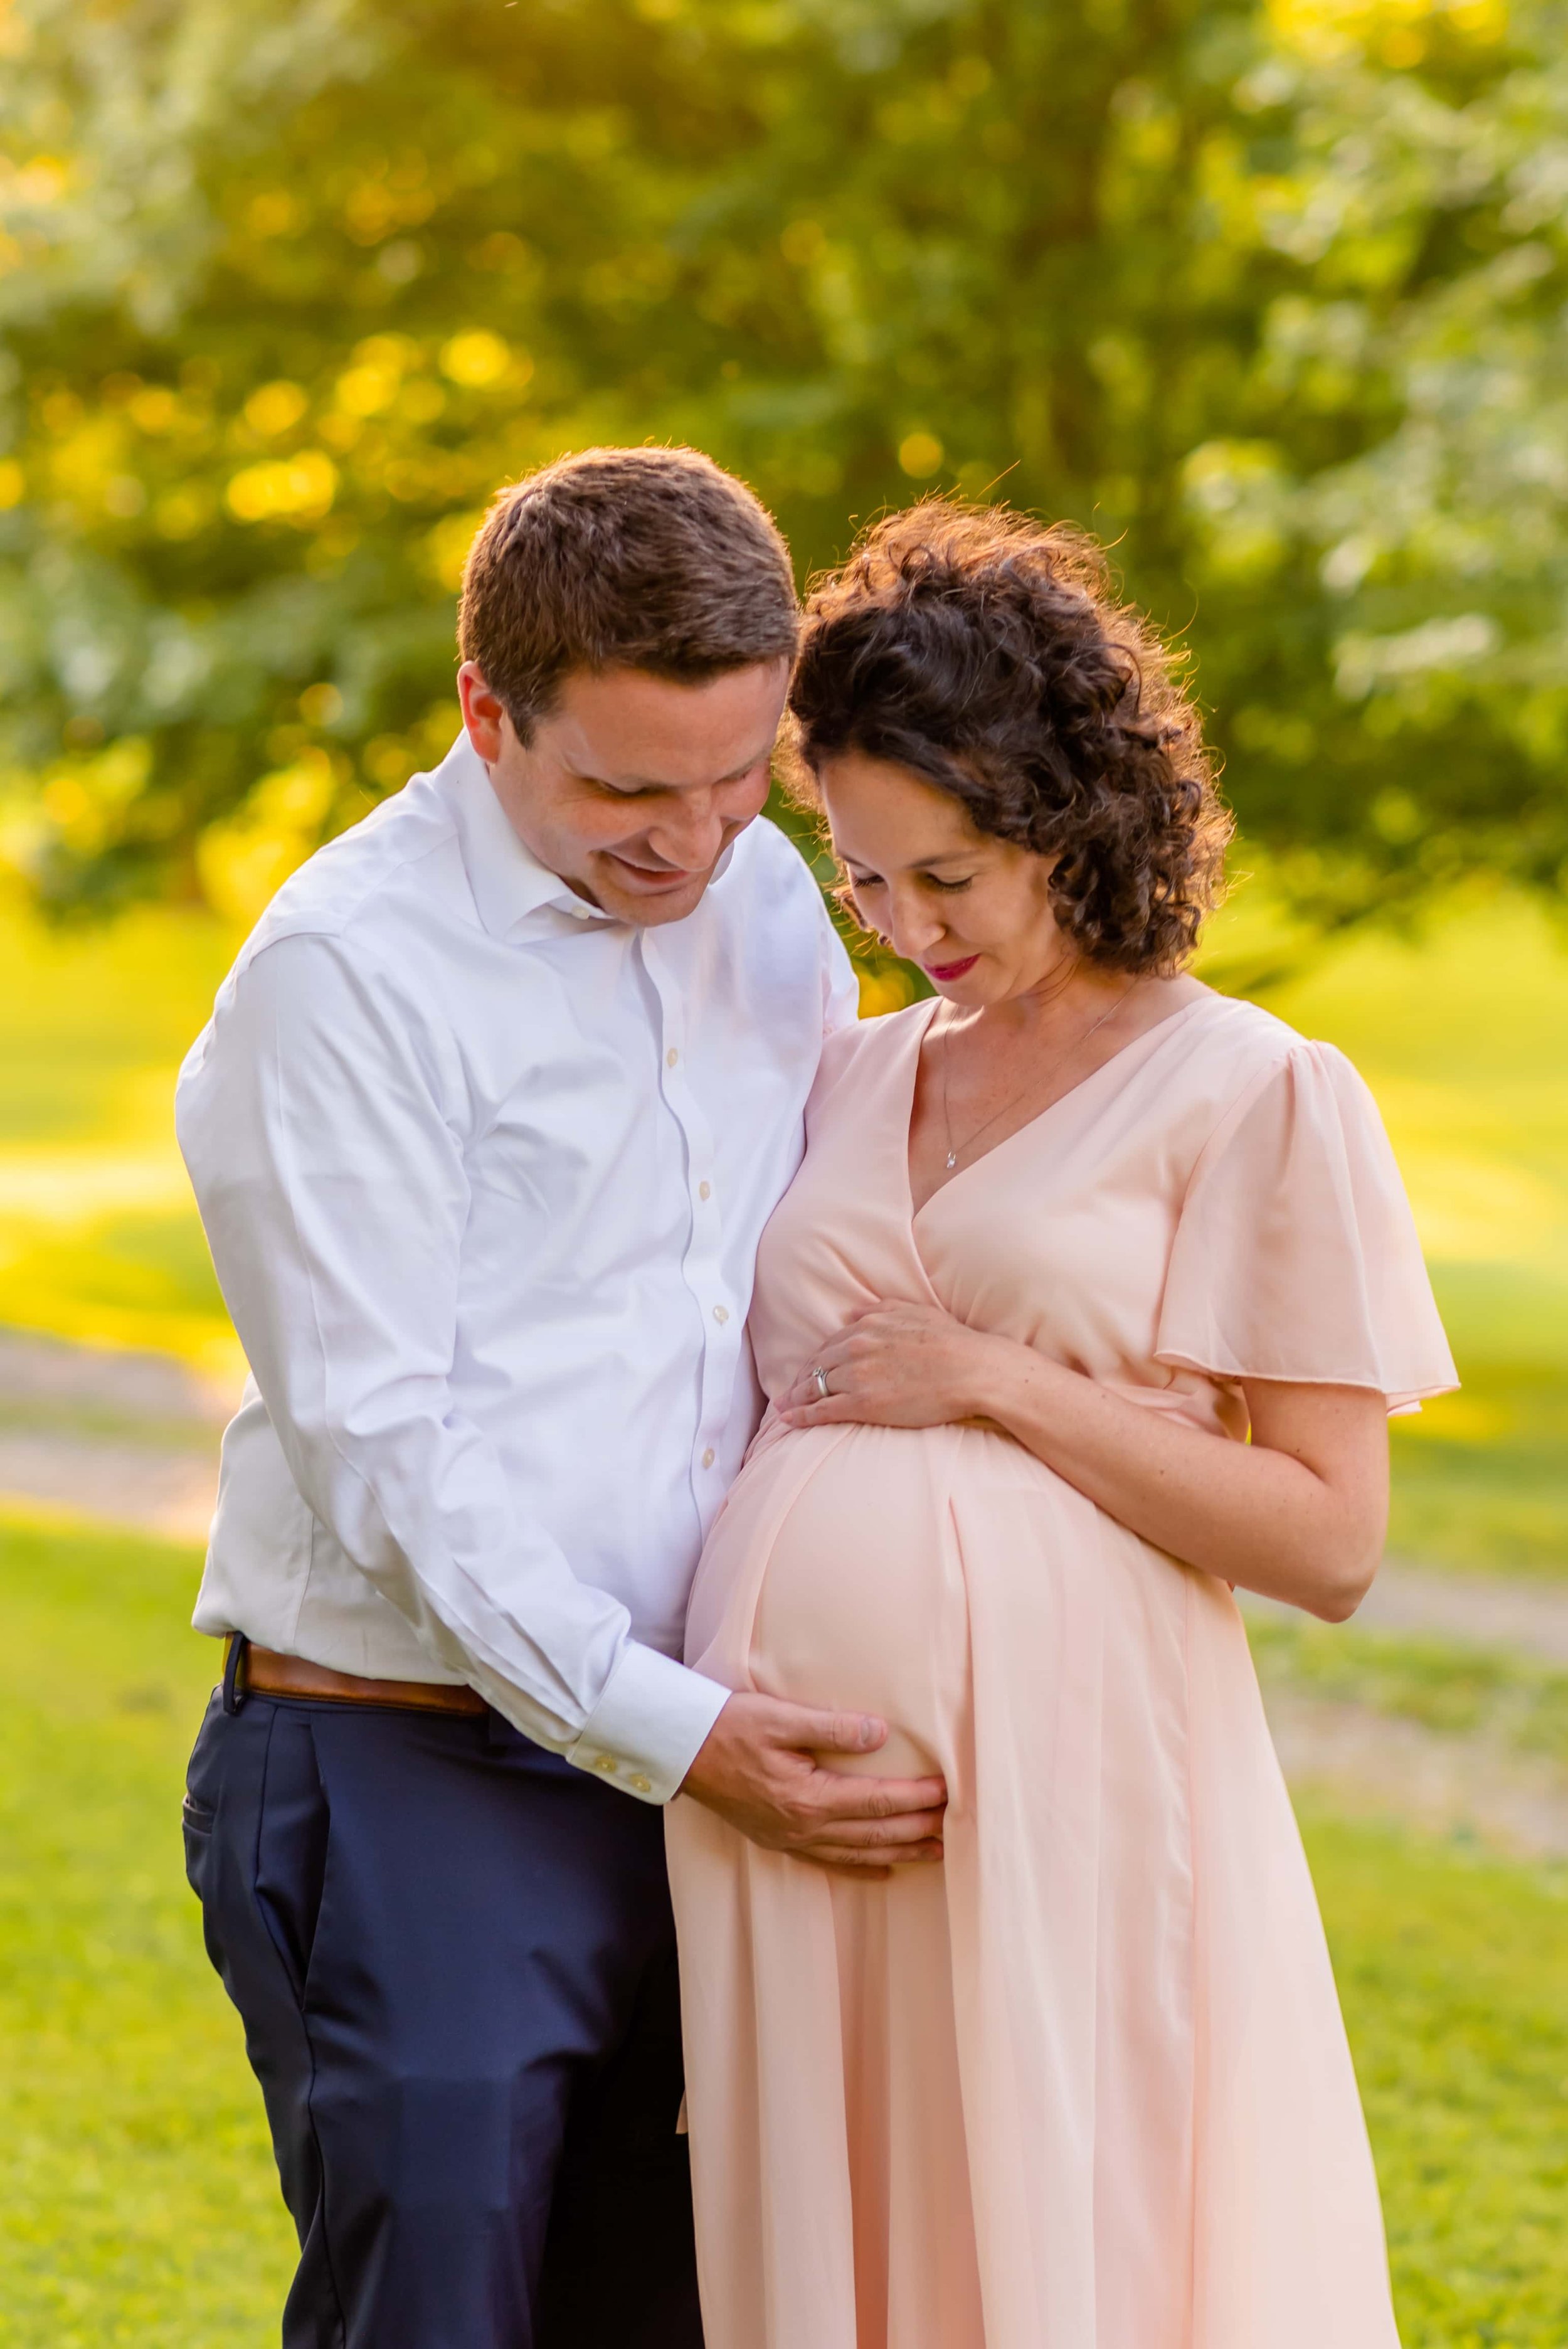 Maryland Maternity Photo of Man and Woman Holding and Looking Down at Her Belly